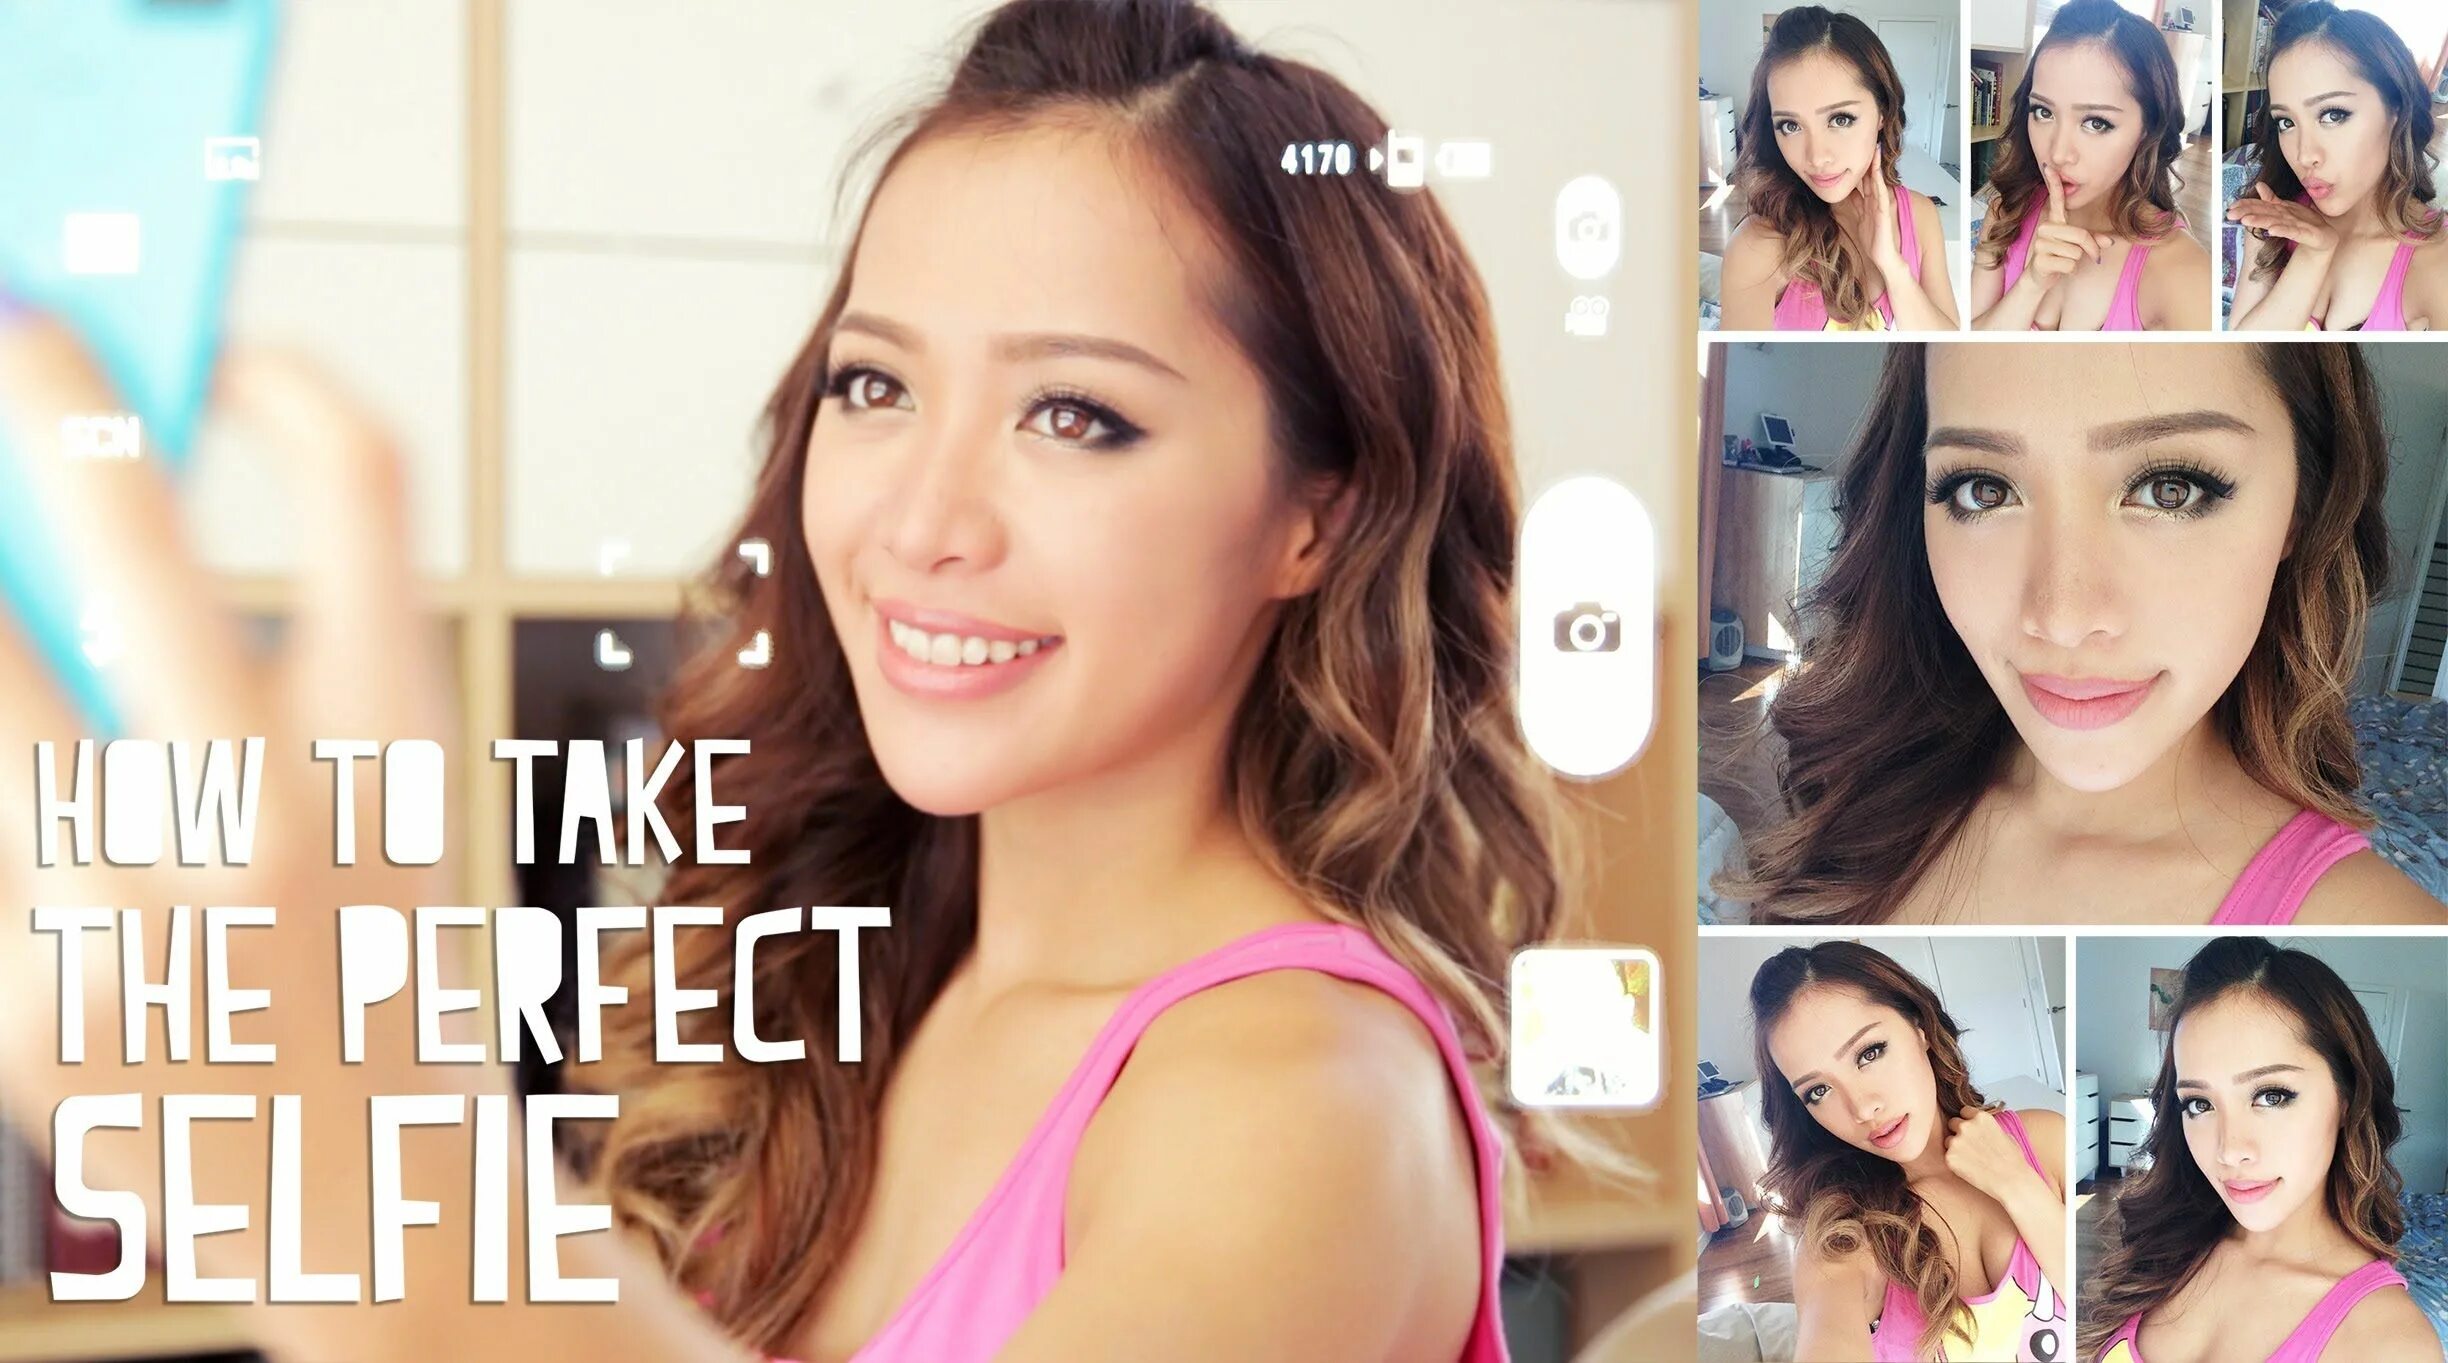 Take good. How to take a selfie. Selfie right. How to take. How to take good photos.